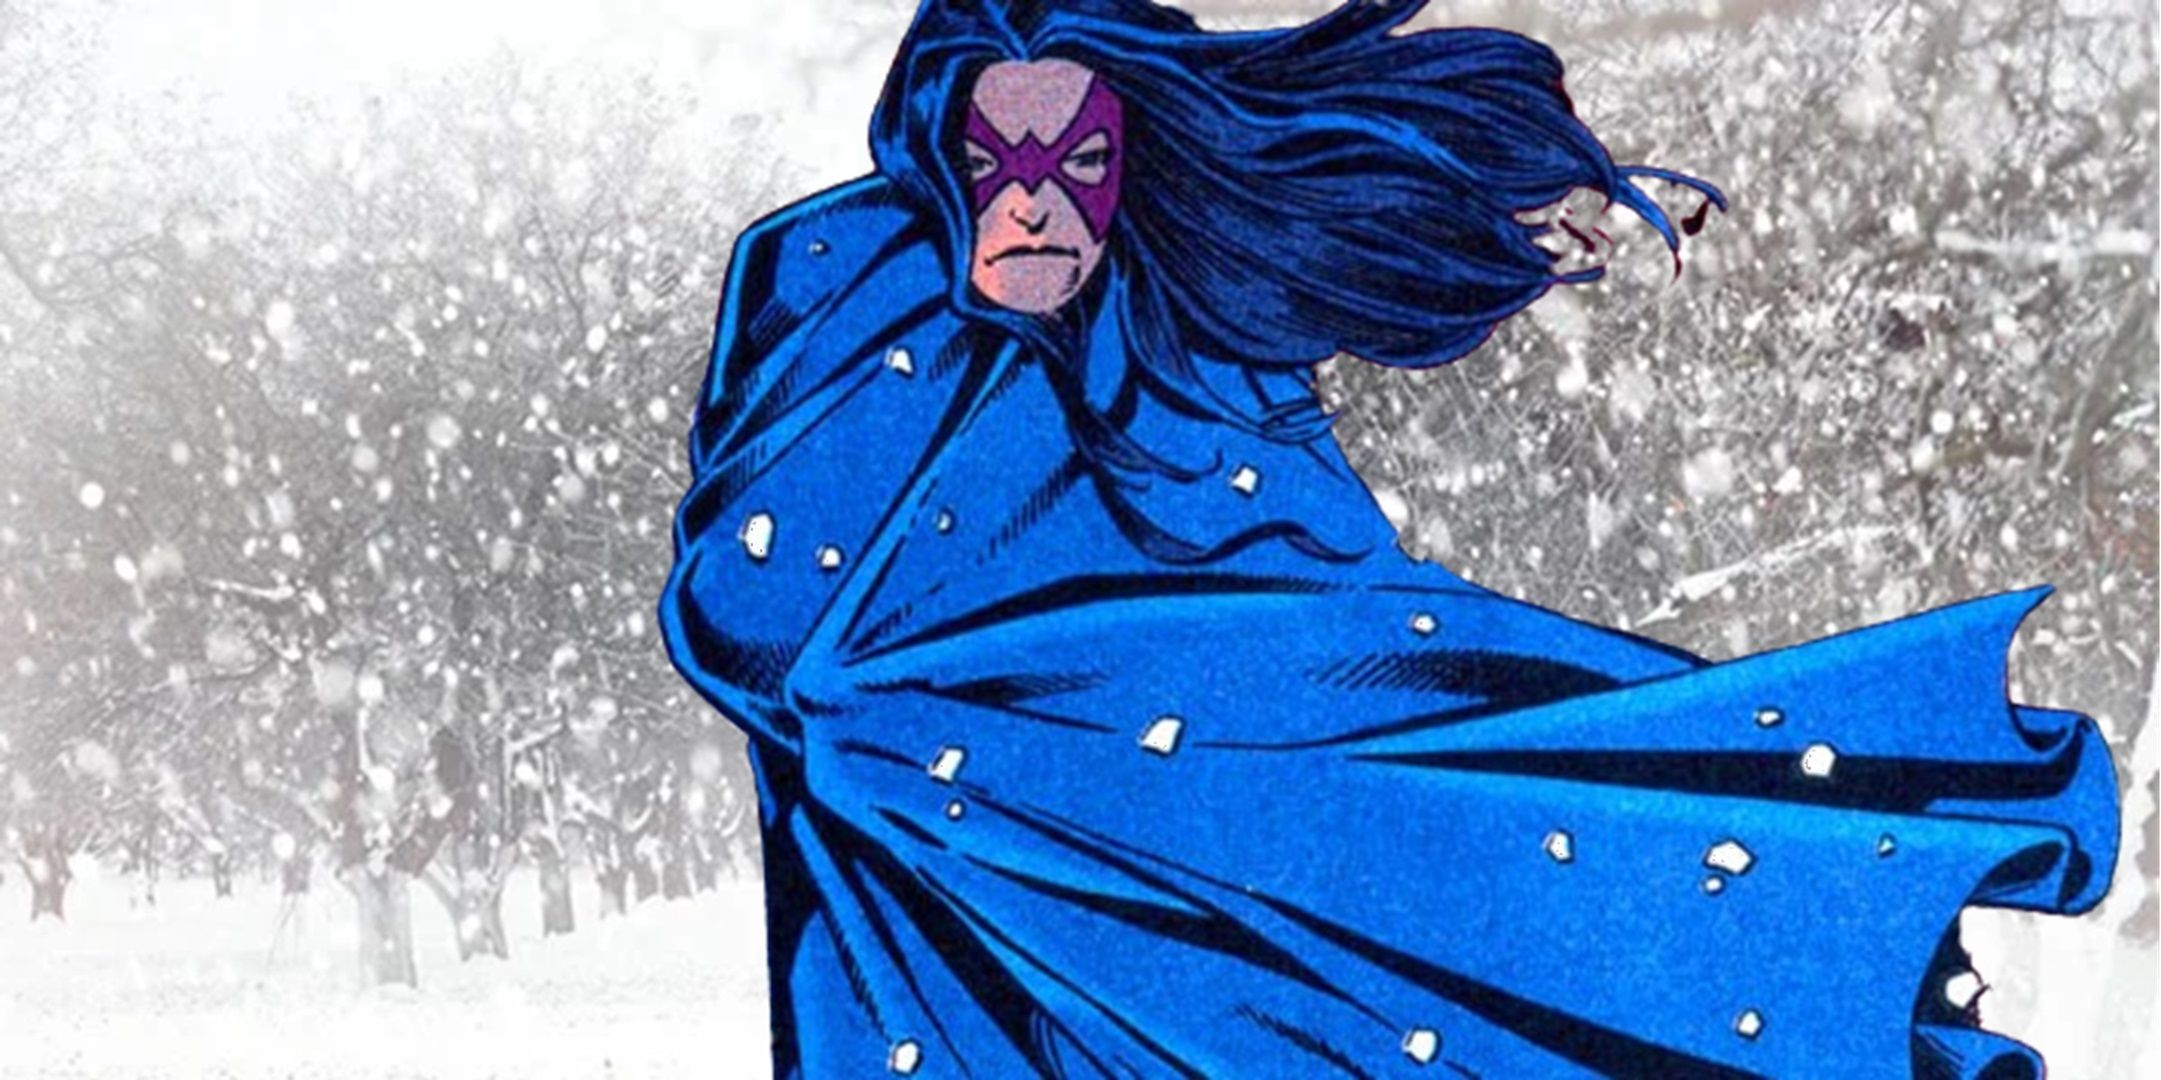 Huntress in the snow